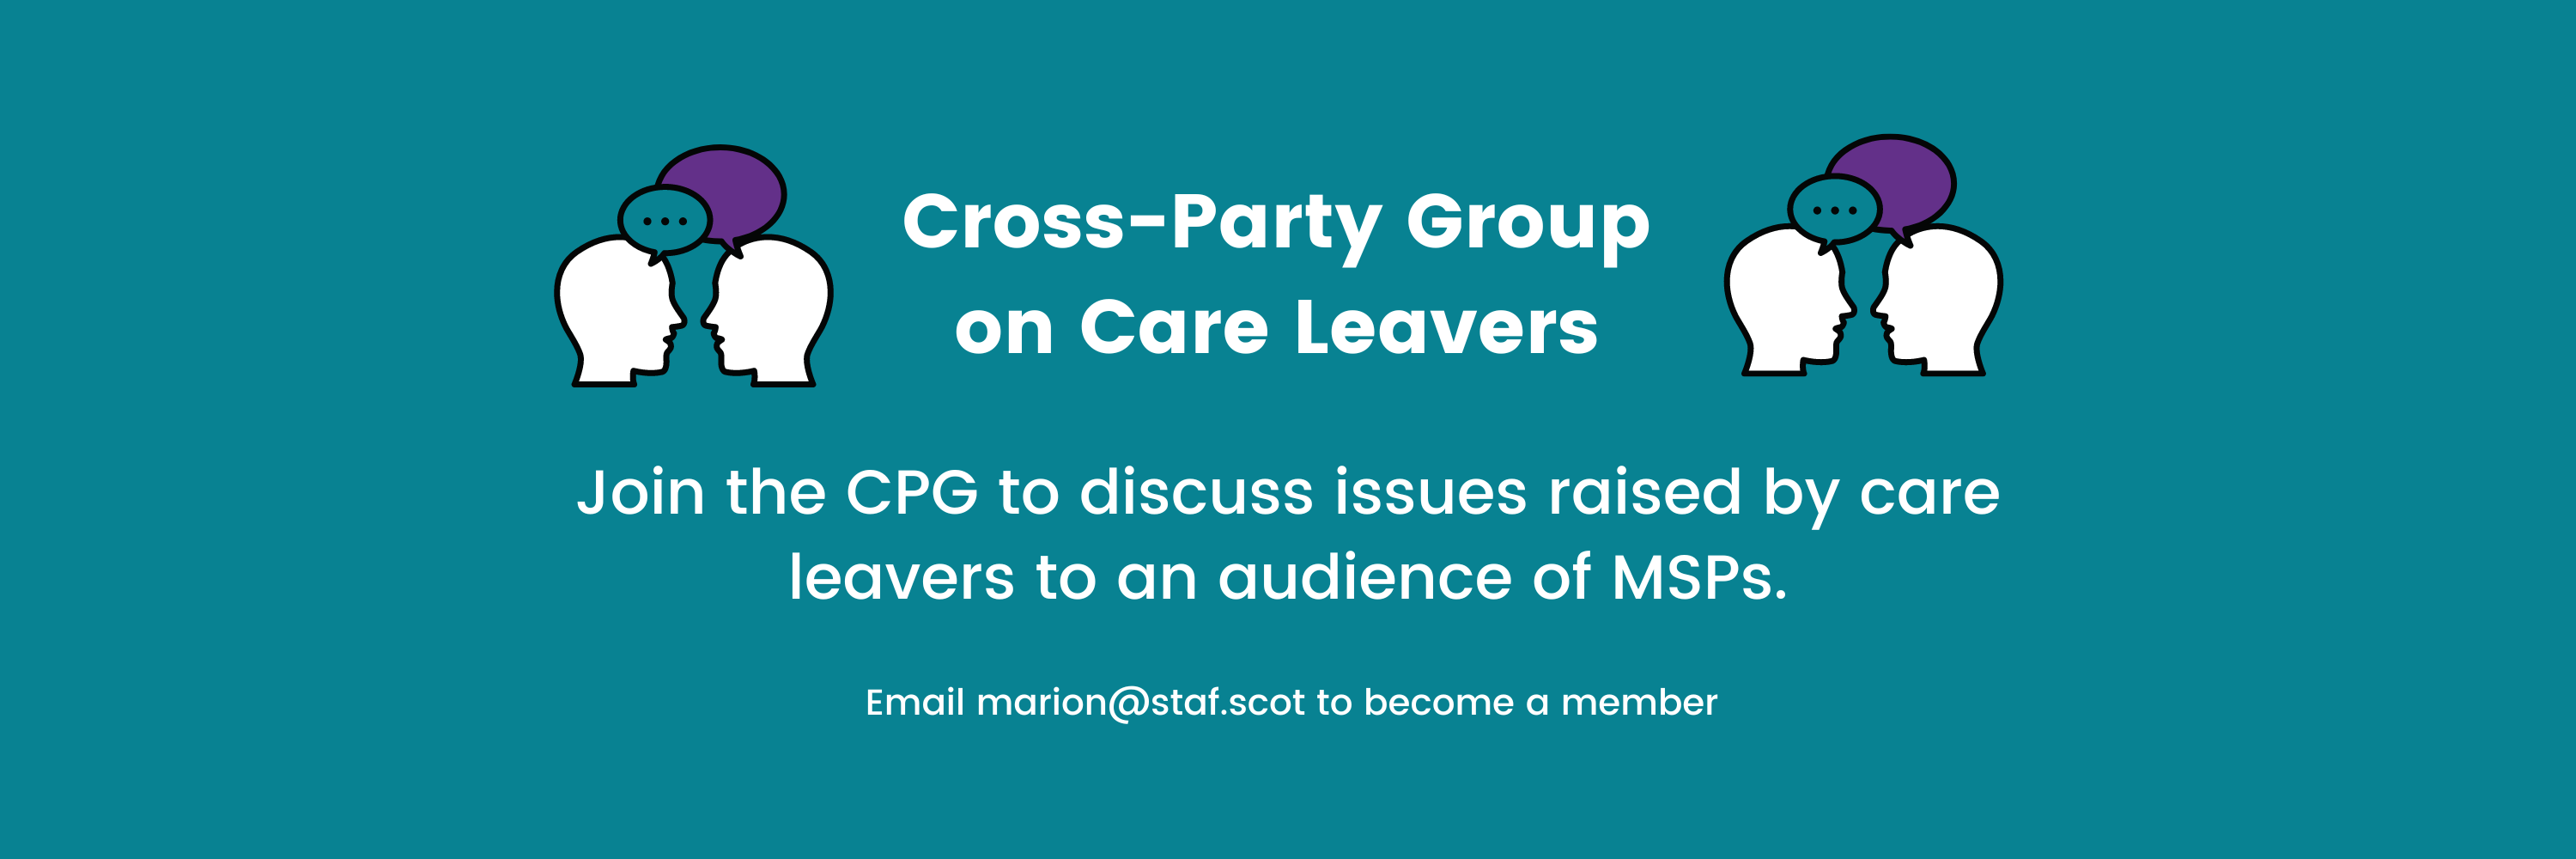 Cross Party Group on Care Leavers 